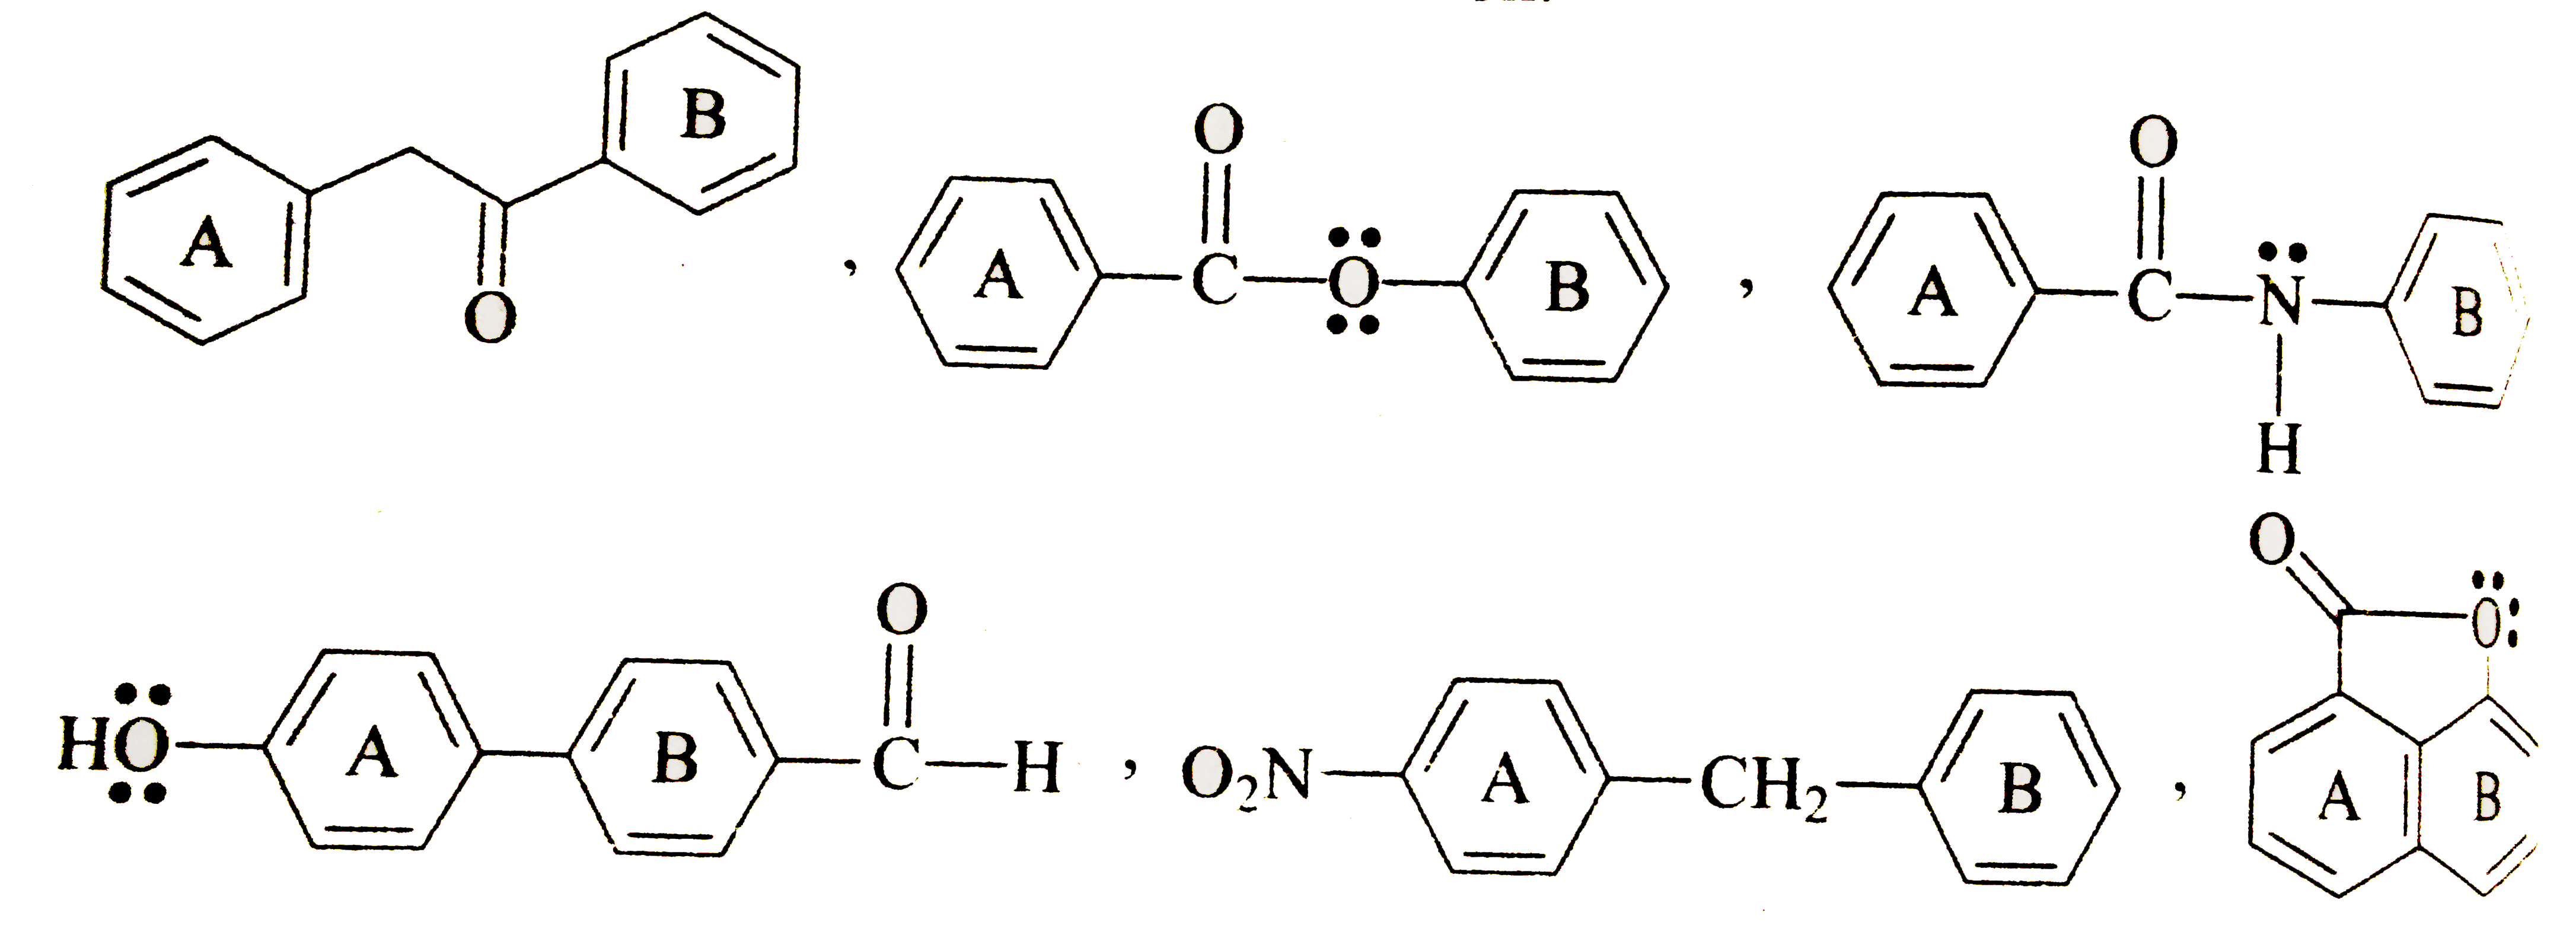 Each of the compounds shows below has two  aromatic ring.  Labled as A and Identify  number of compounds in  which  ring B is more active than  ring A for  electrophilic aromatic substitution  reaction .